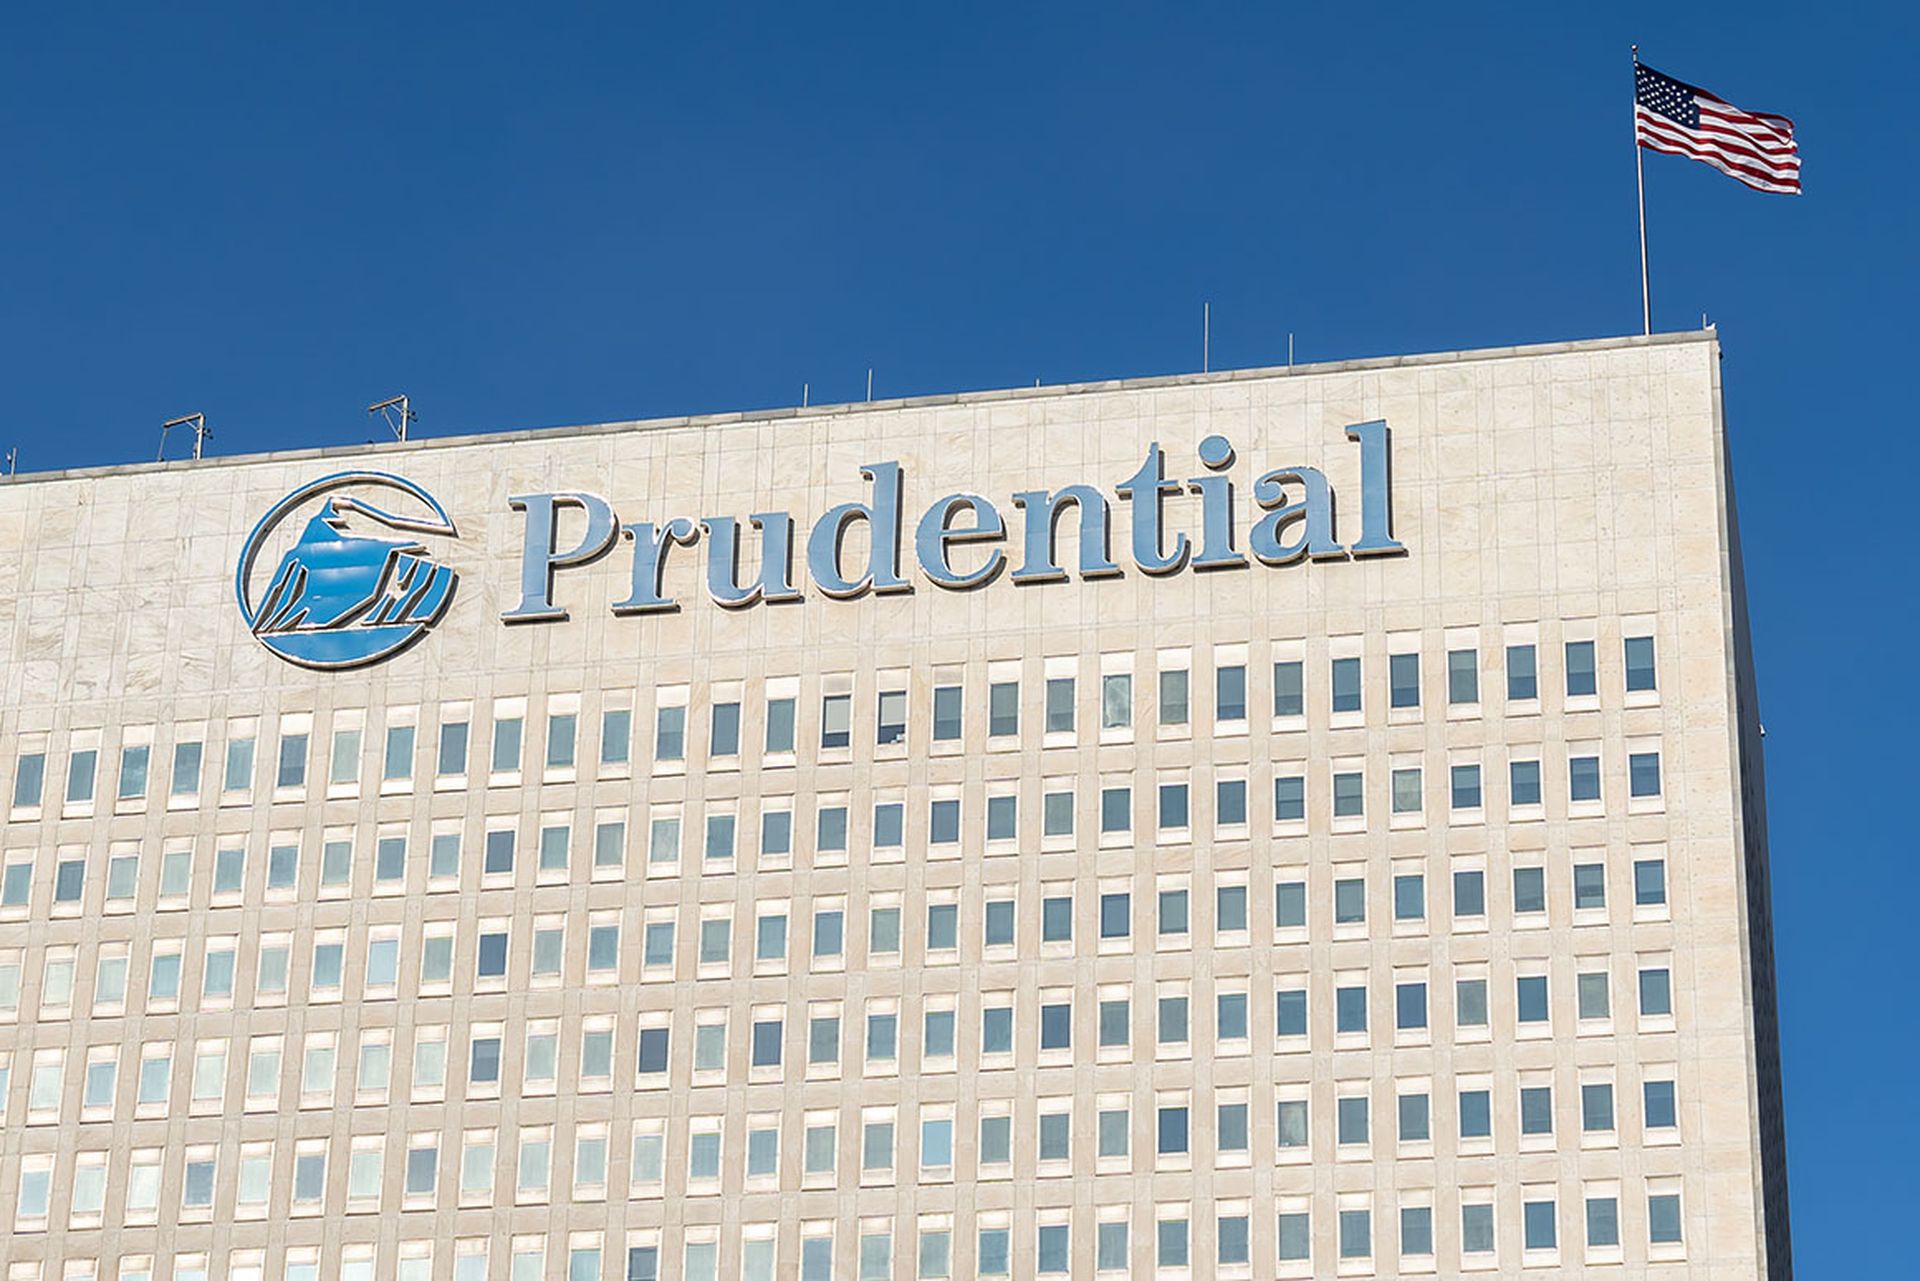 Prudential sign on their headquarters building in New Jersey.